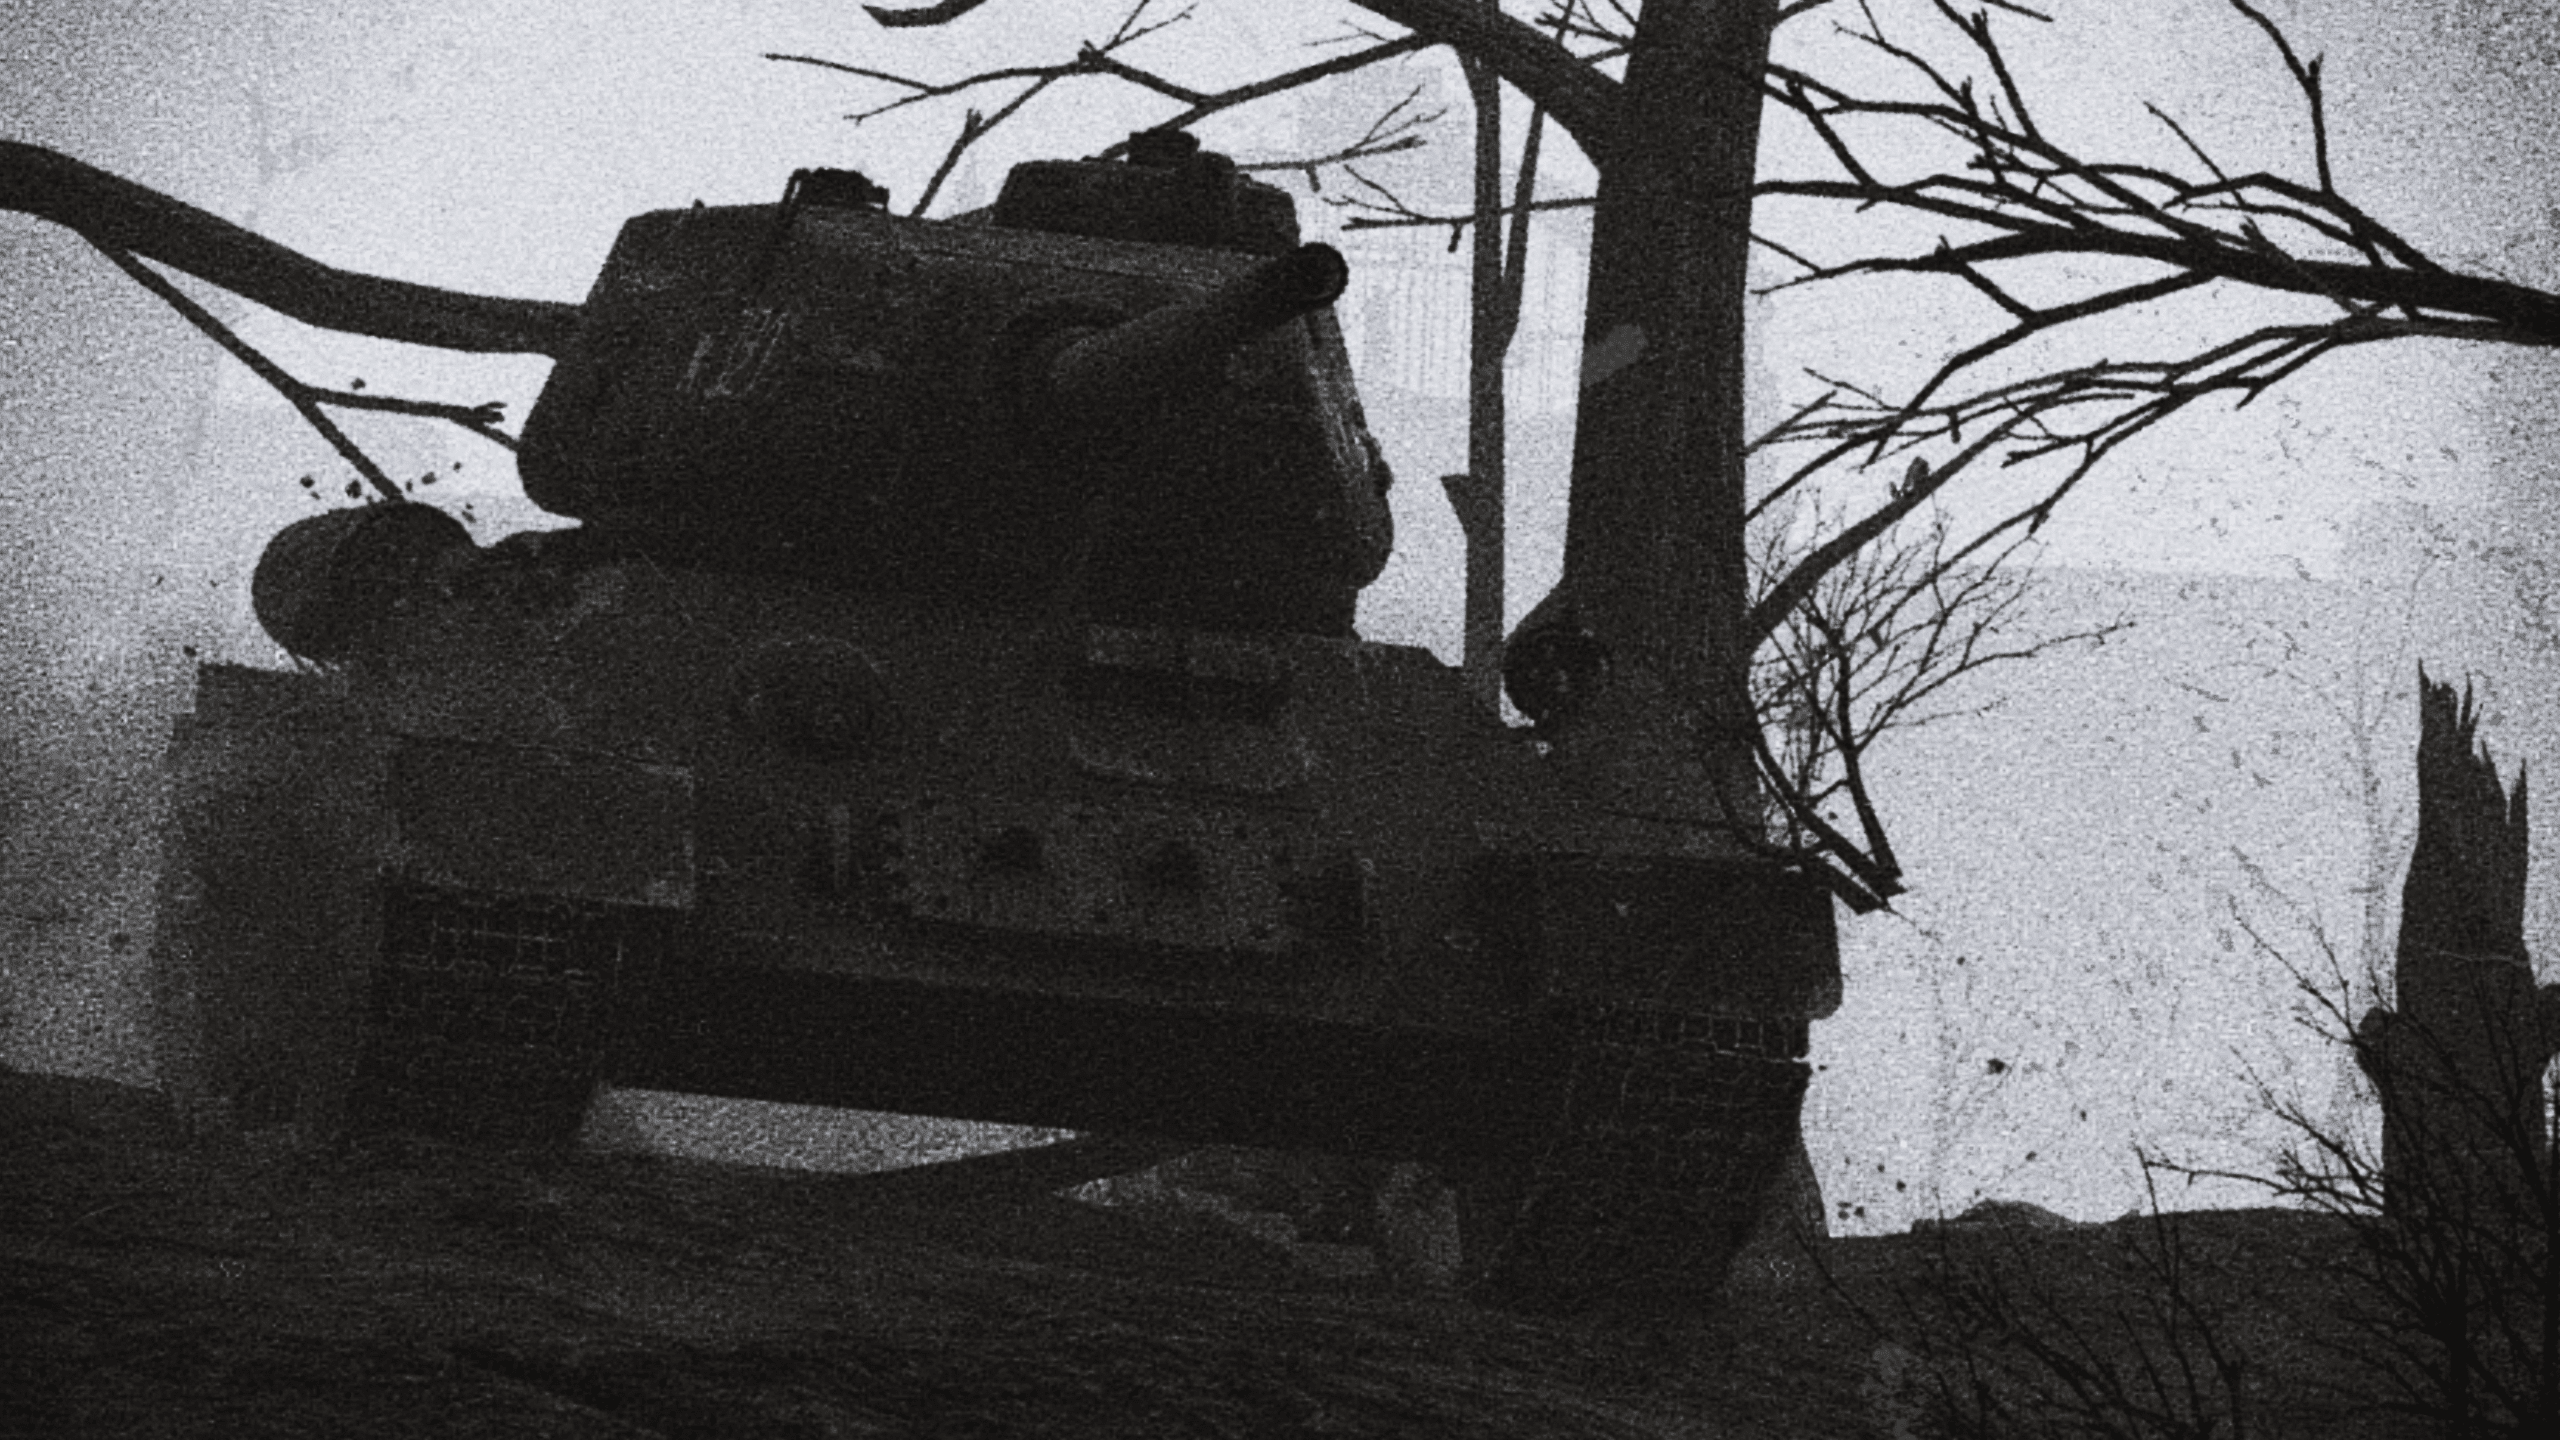 t34.png